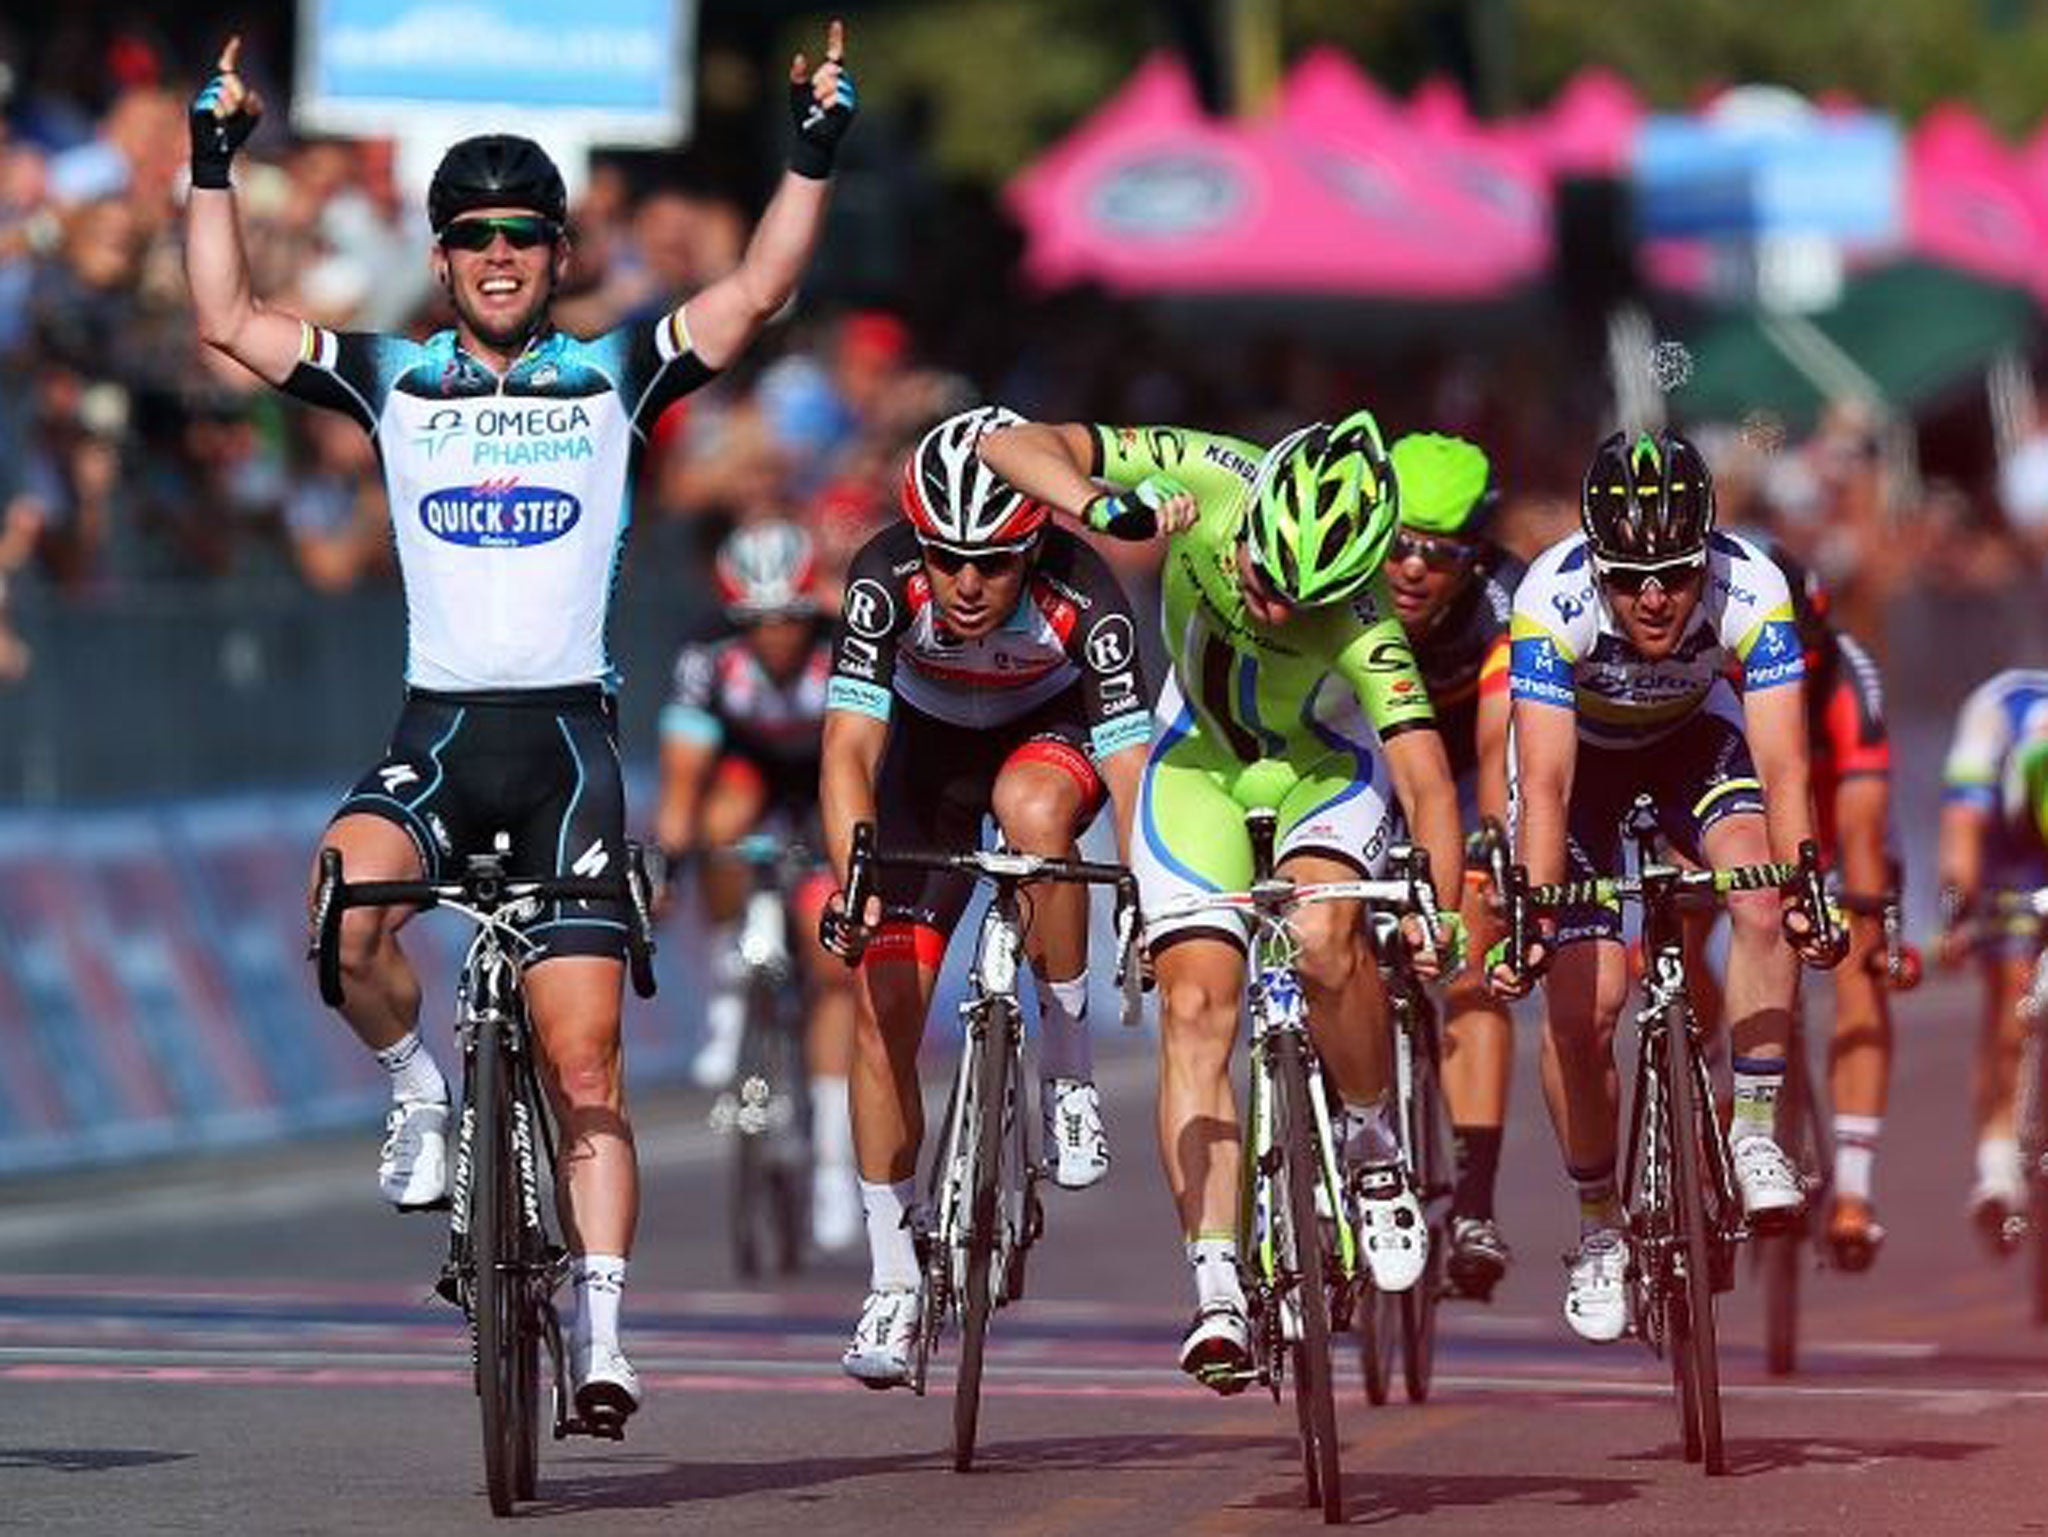 Mark Cavendish wins the first stage of the Giro d'Italia in Naples